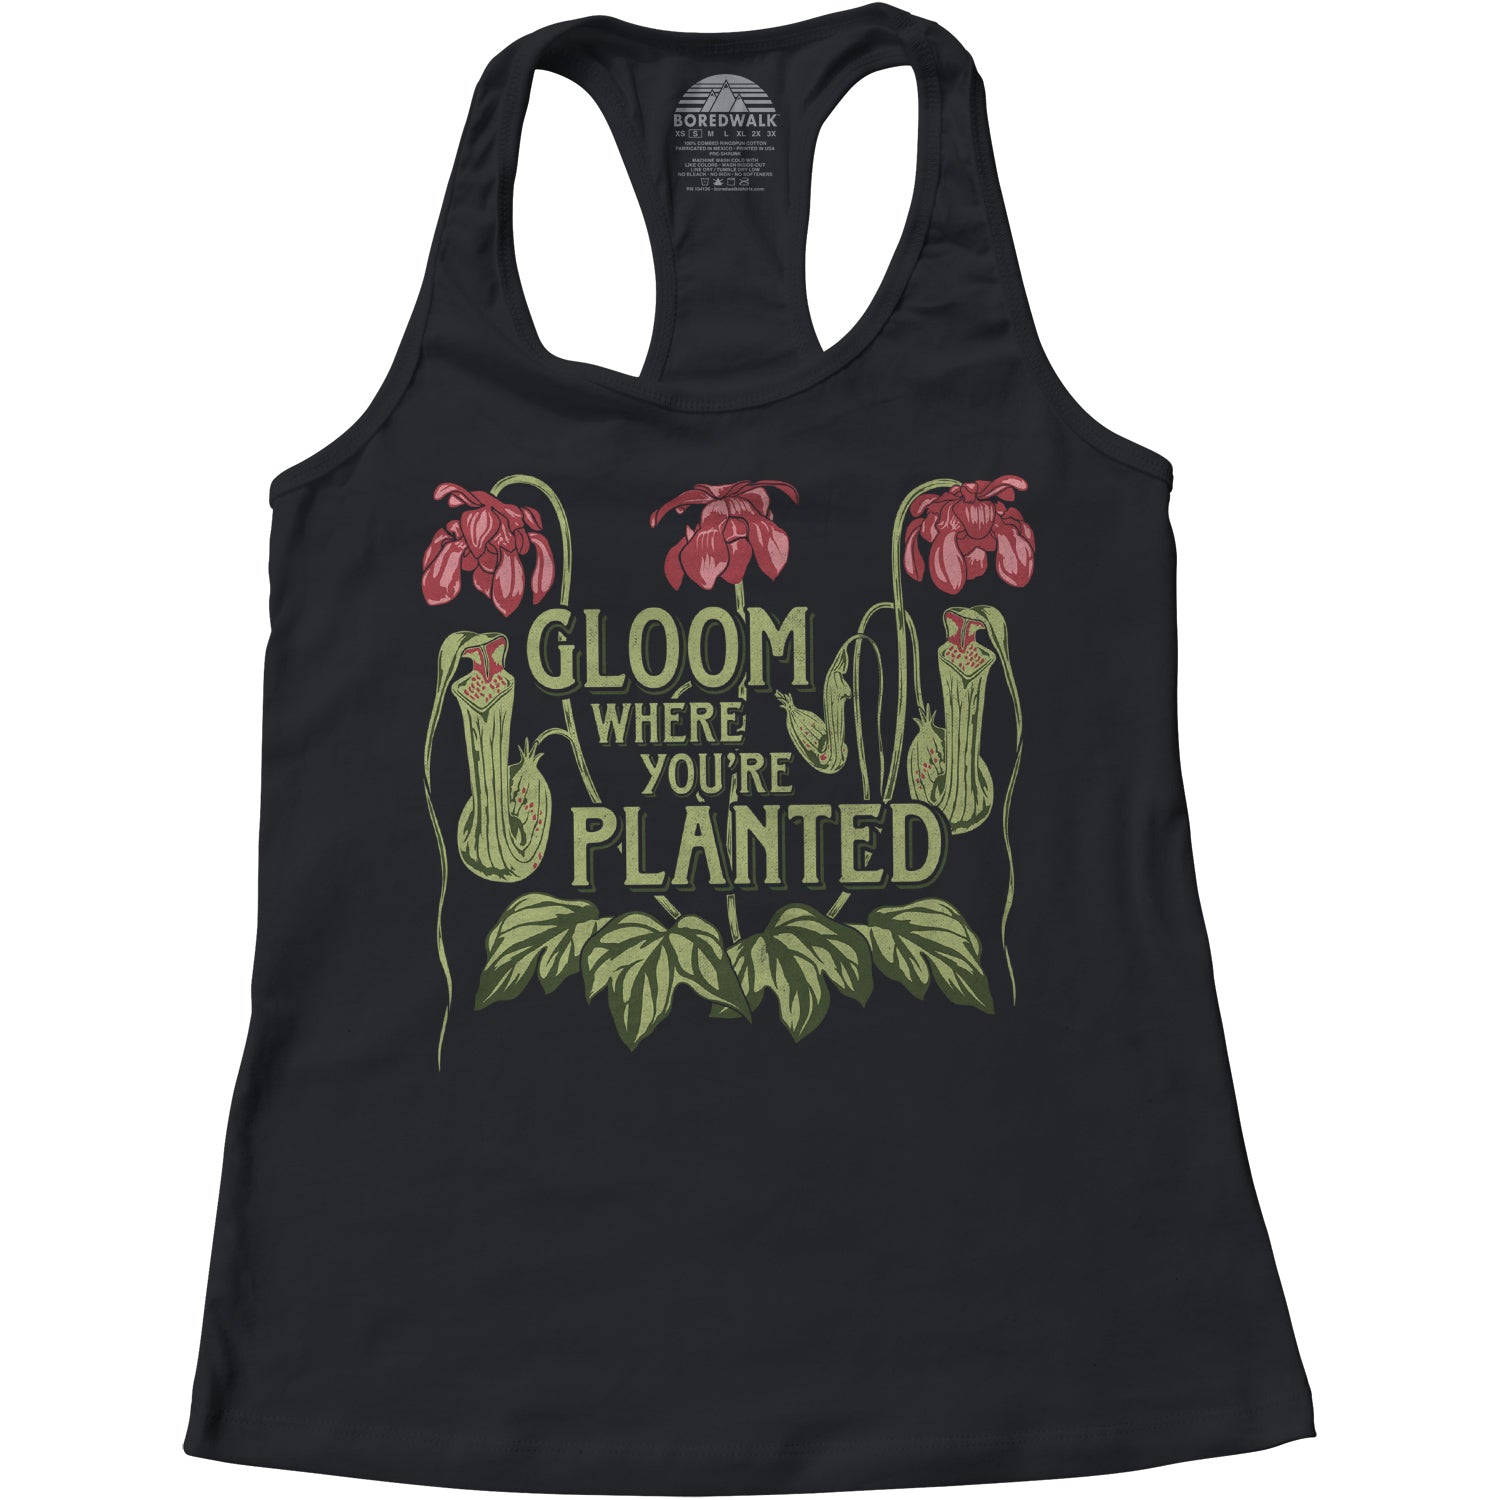 Women's Gloom Where You're Planted Racerback Tank Top